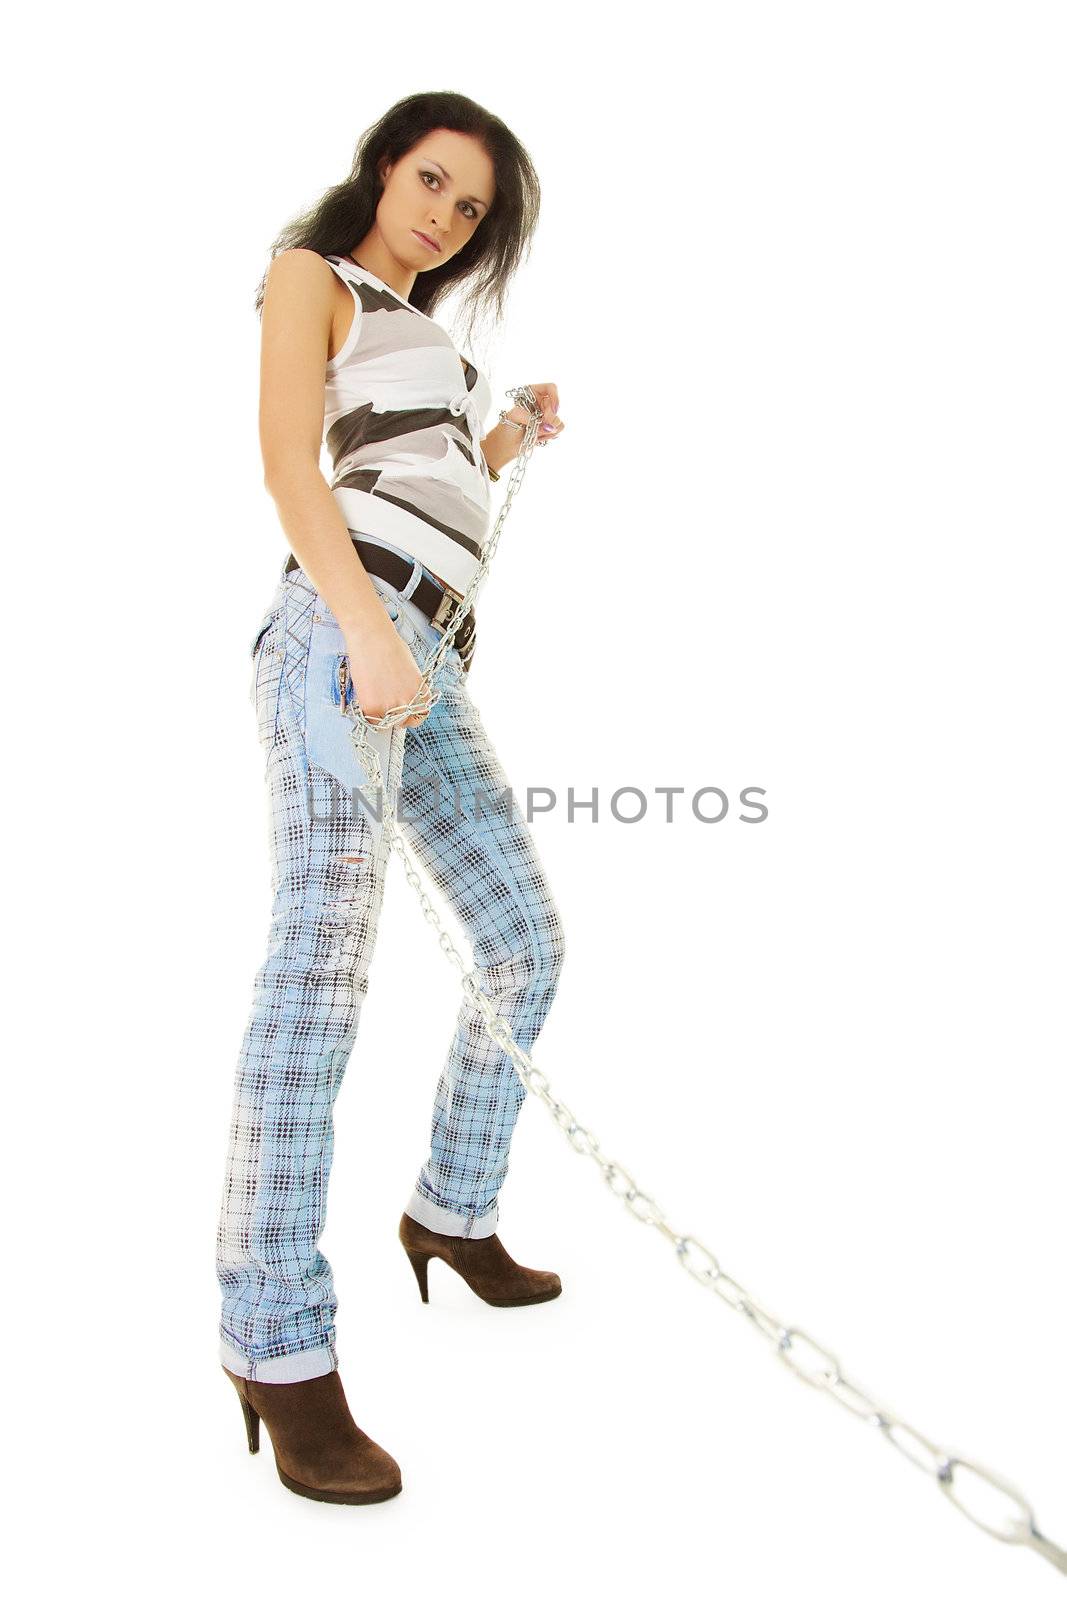 A young woman walks on a chain your pet by pzaxe